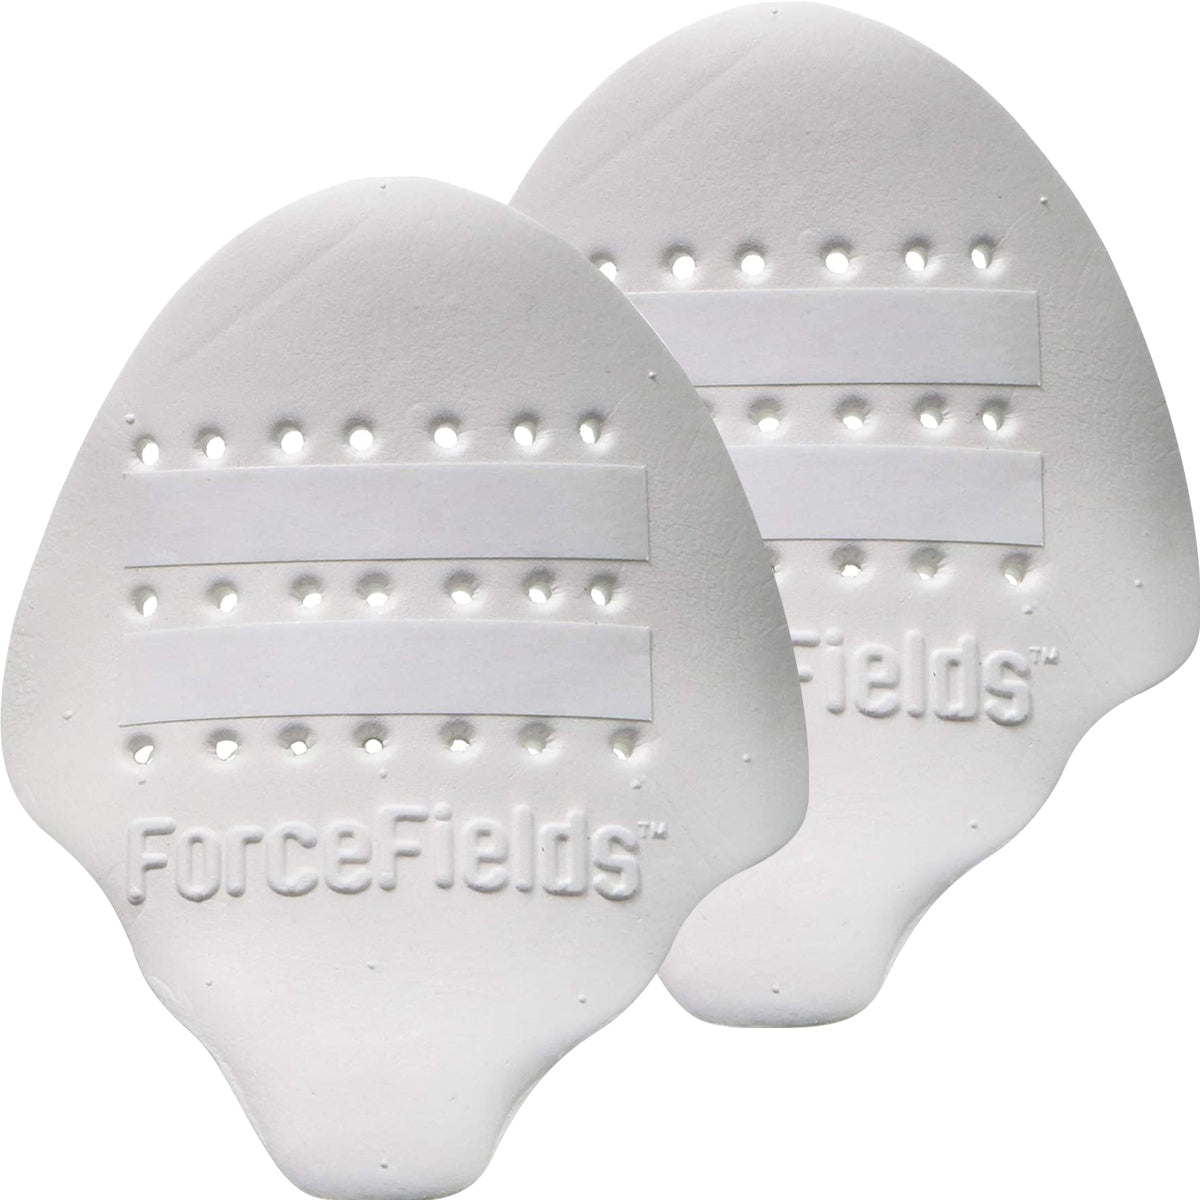 Sof Sole ForceFields Toe Box De-Creaser SofSole